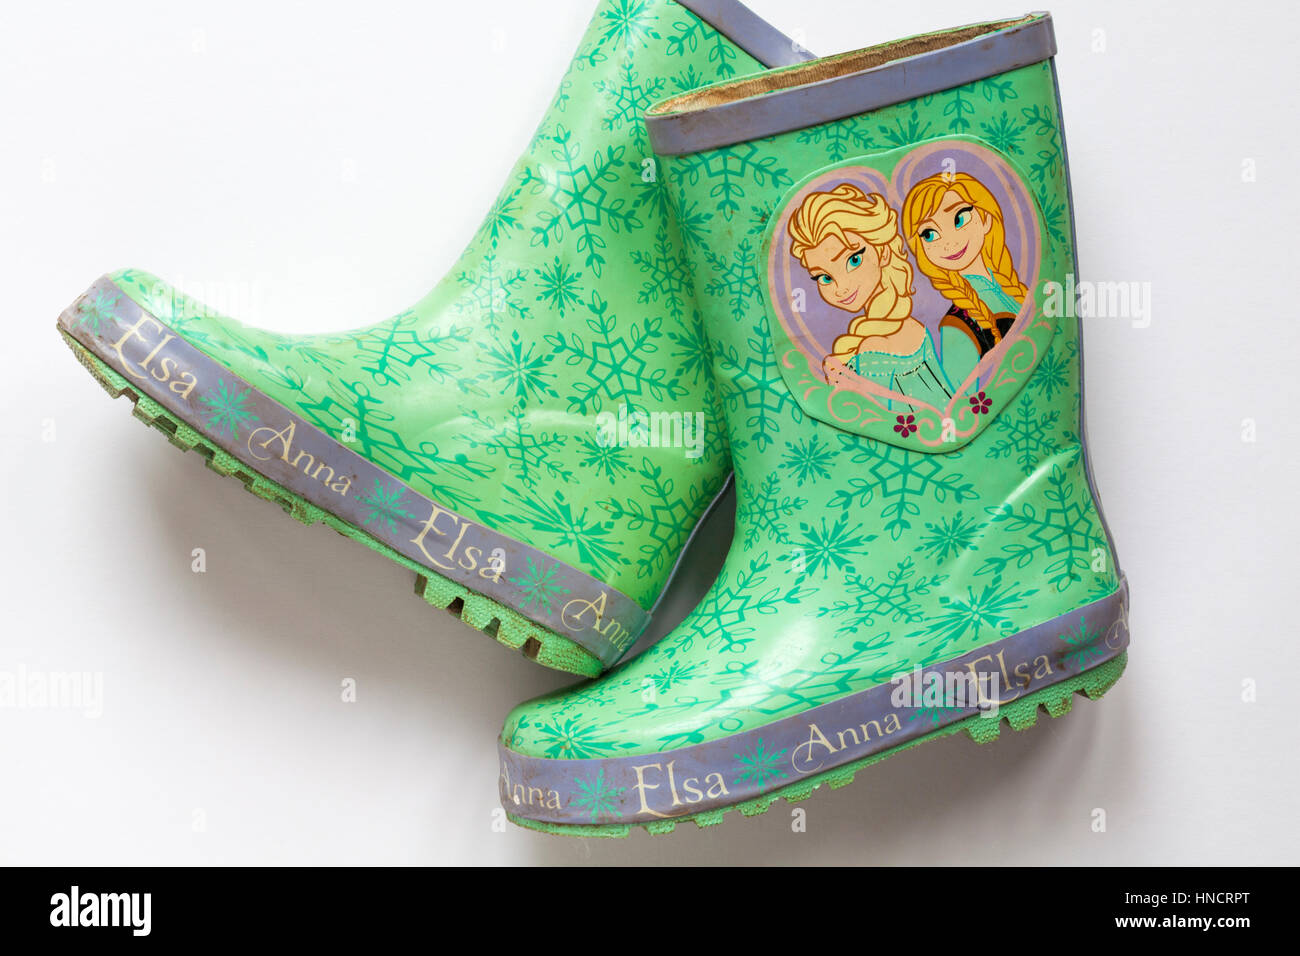 Well loved worn pair of children's wellie boots with Anna and Elsa from Frozen on set on white background Stock Photo